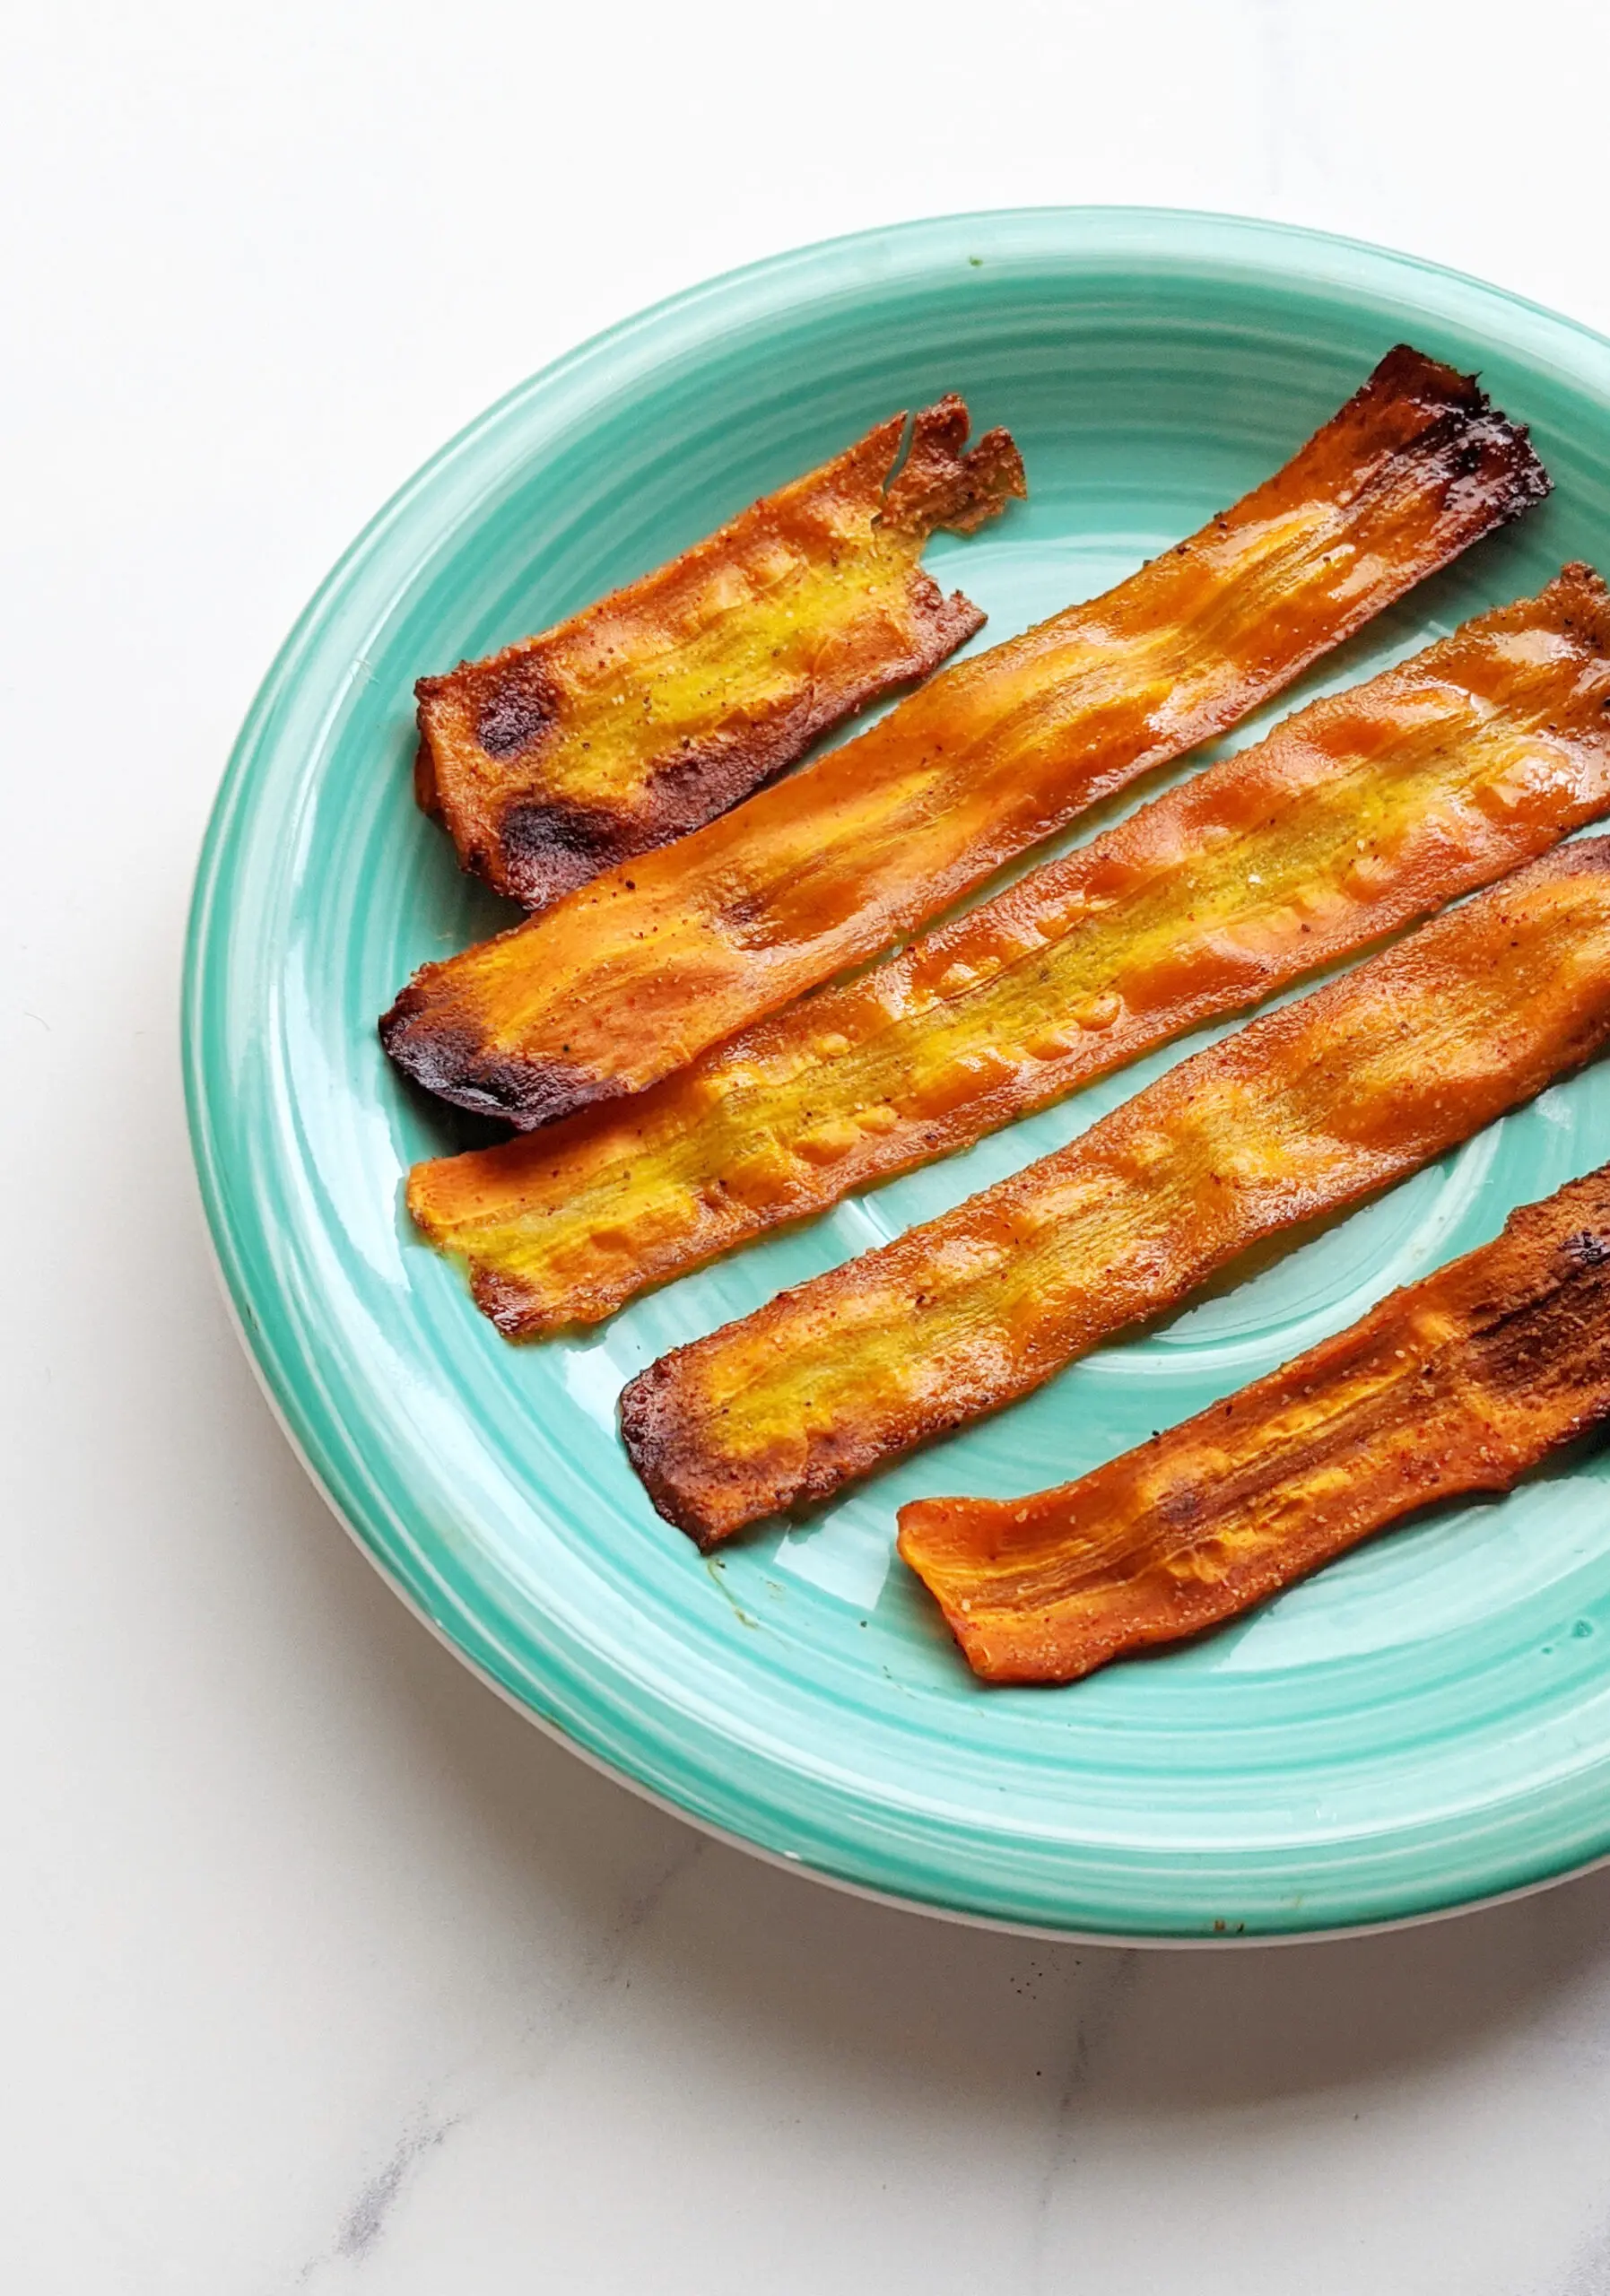 smoked carrot bacon - How do you add bacon flavor without bacon